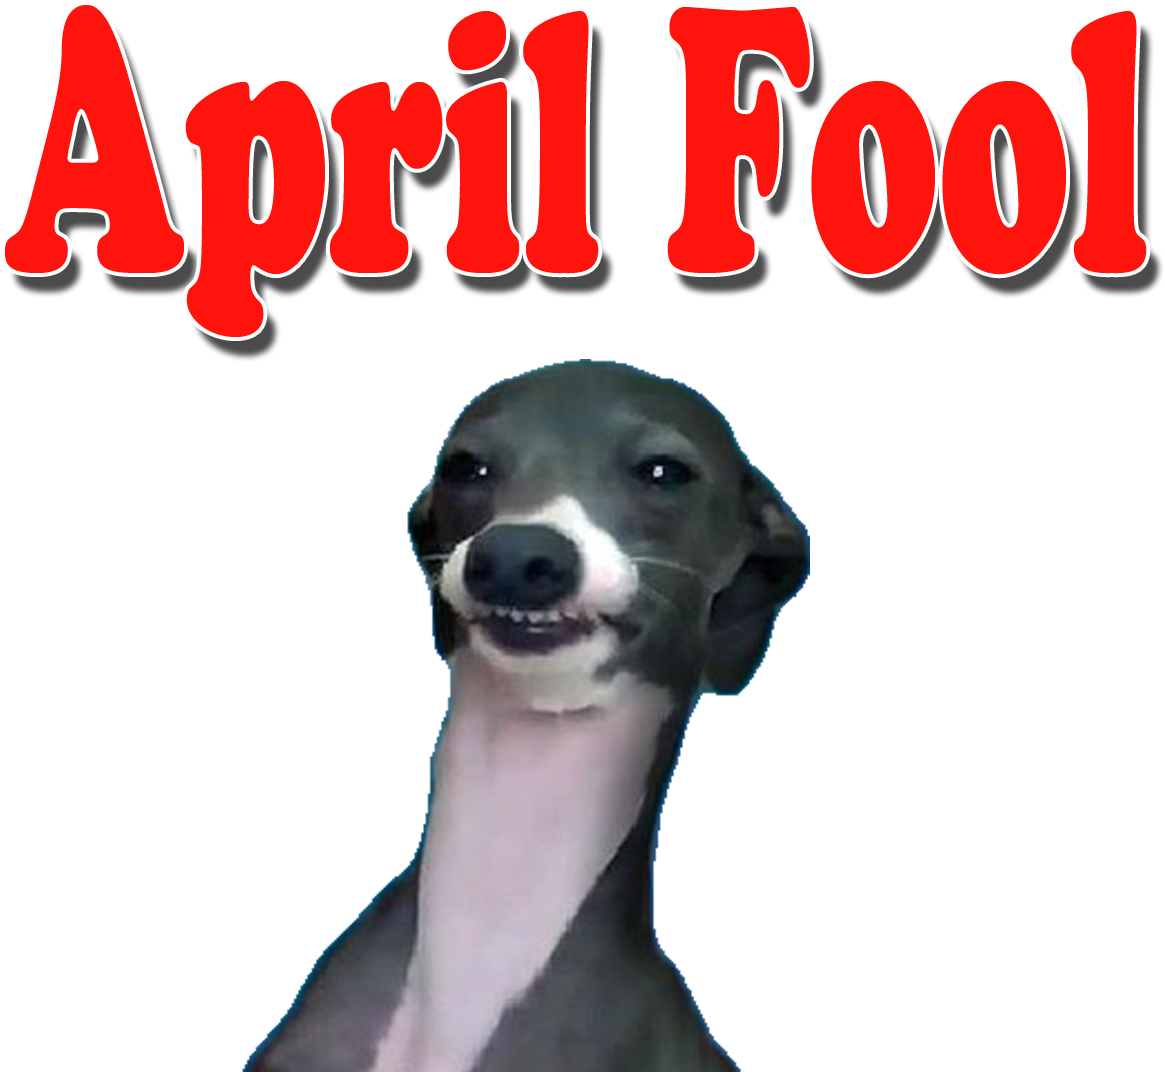 April Fool's Day Png Pictures - Kermit From Jenna Marbles (1920x1200)